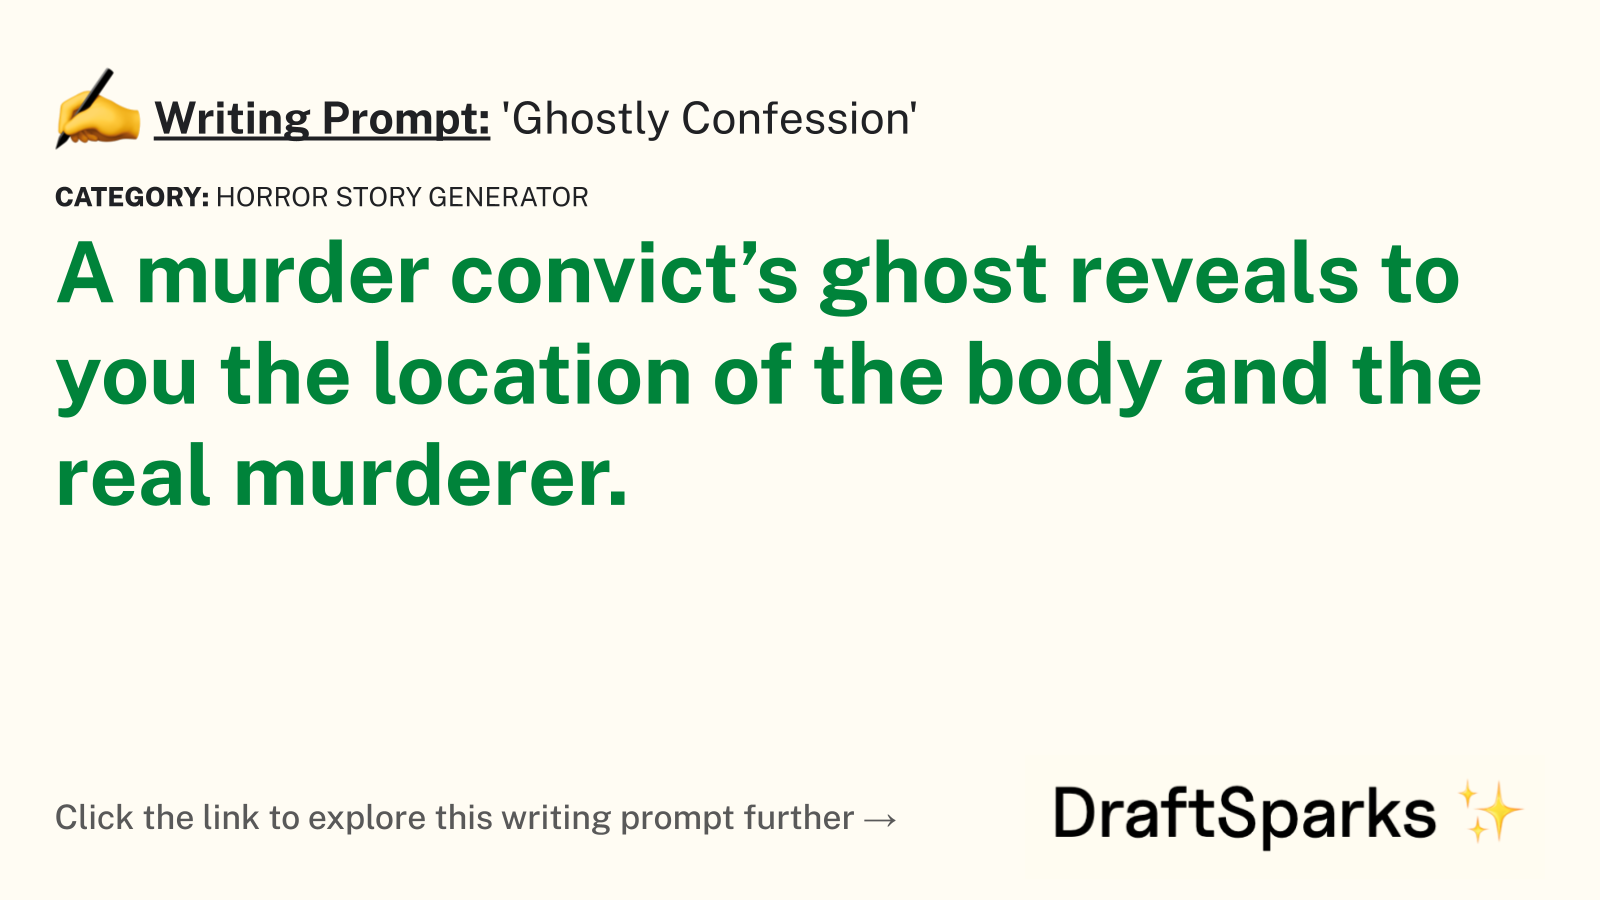 ‘Ghostly Confession’